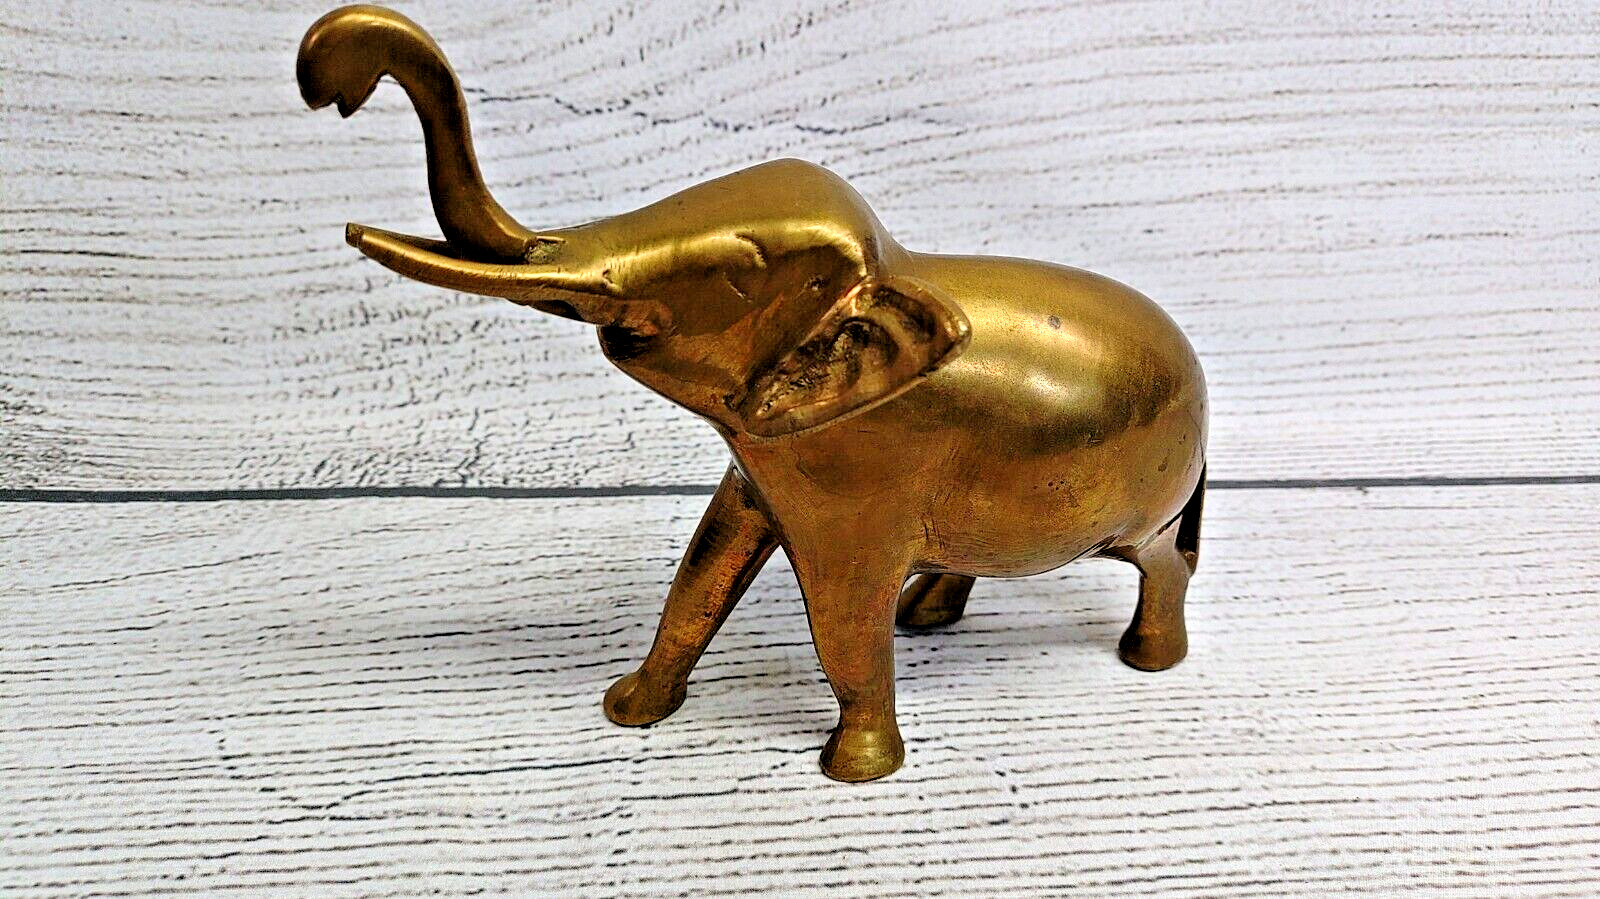 Vintage Solid Brass Trunk Up Elephant Figurine Etched Made in India